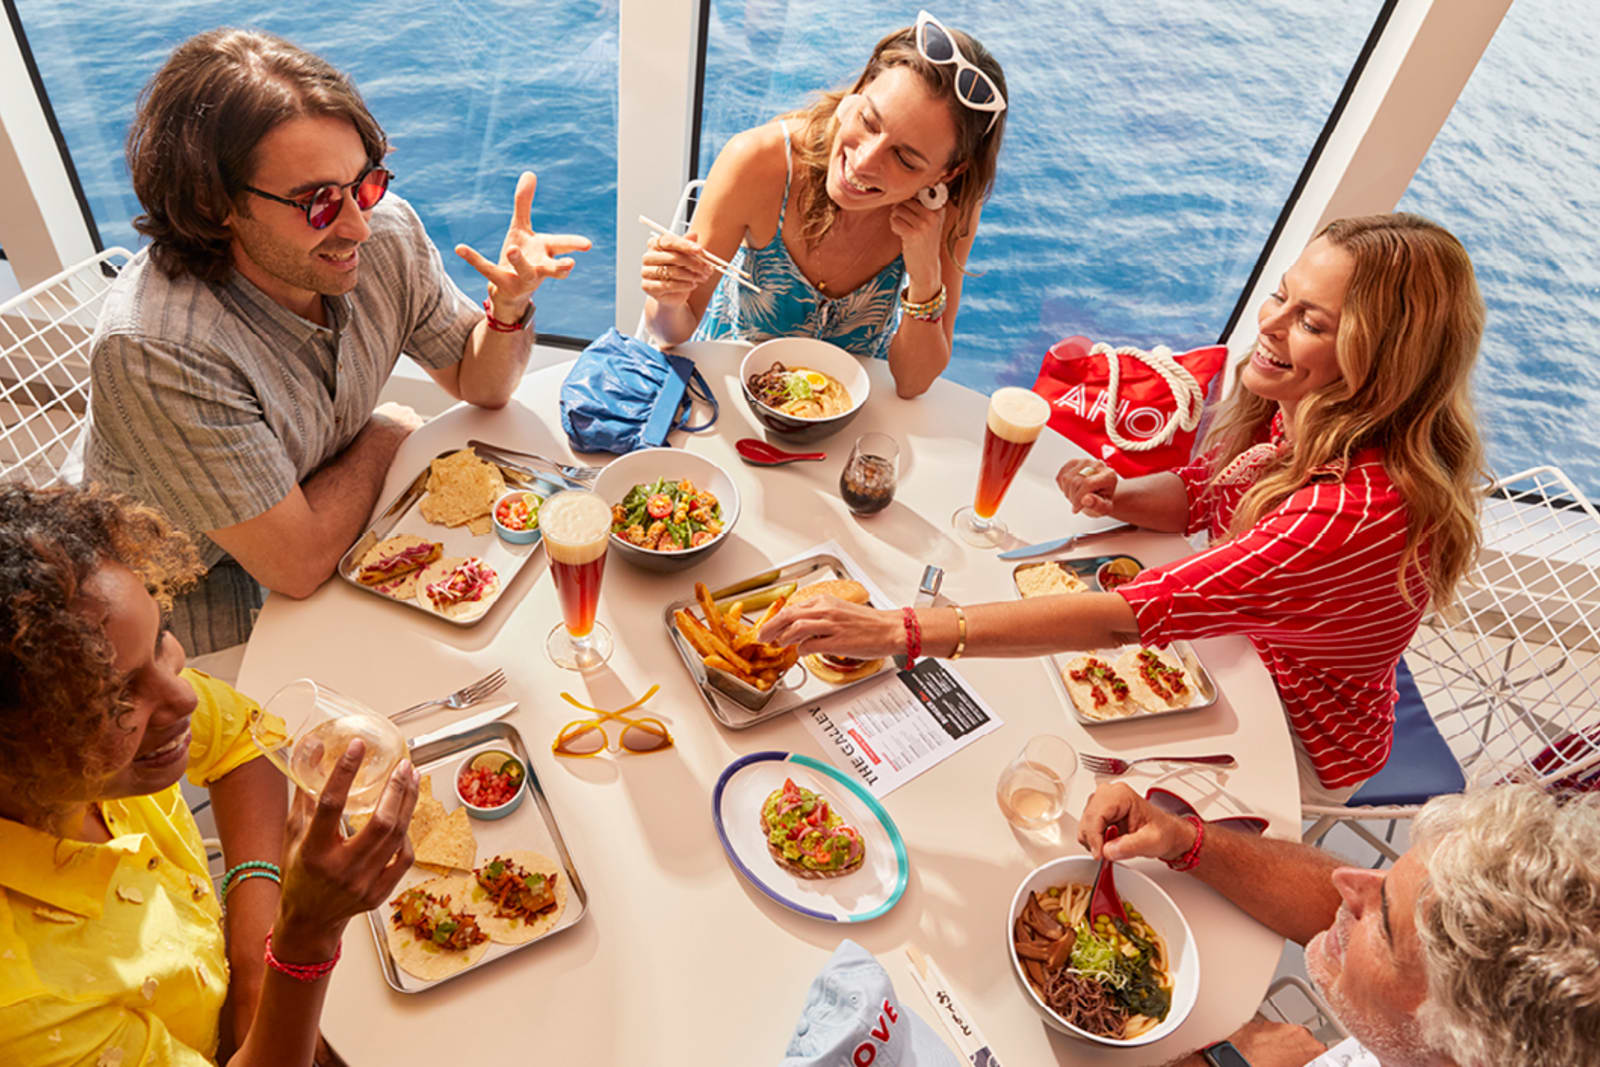 A group of friends enjoying a meal on a cruise